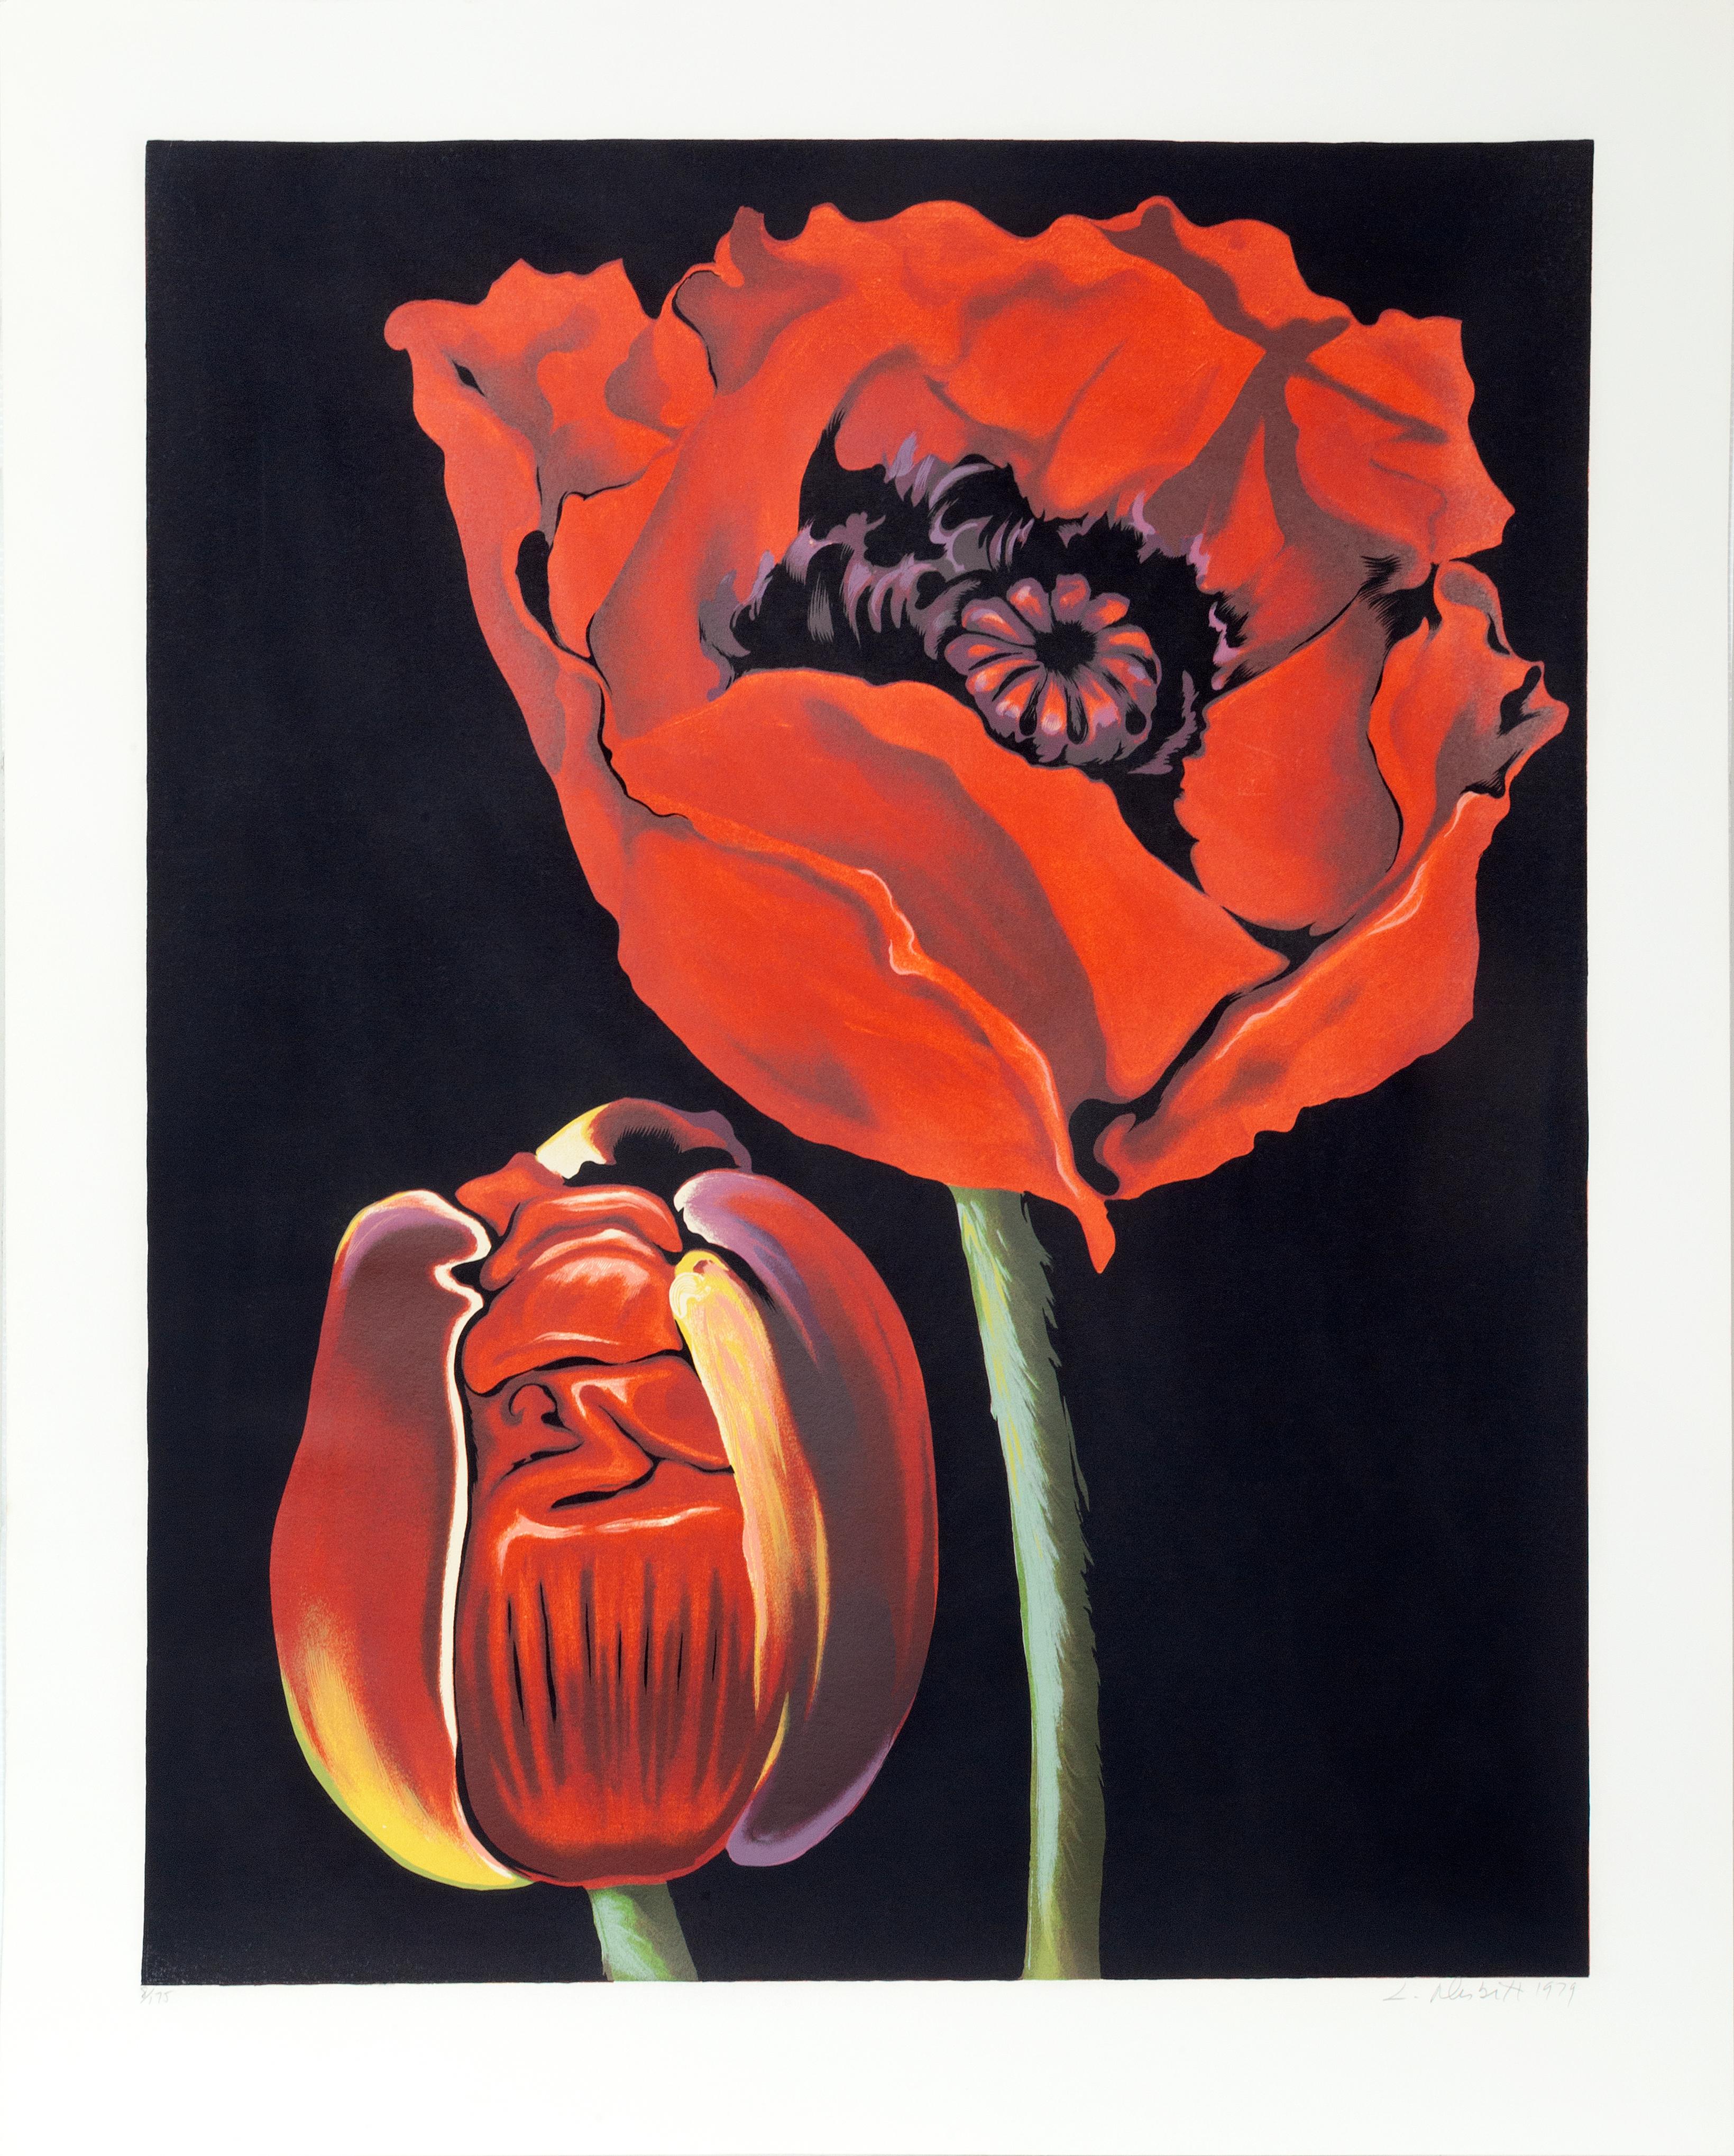 Artist: Lowell Nesbitt, American (1933 - 1993)
Title: Red Poppies
Year: 1979
Medium: Silkscreen, signed and numbered in pencil
Edition: 175
Image Size: 37.5 x 29.5 inches
Paper Size: 44.5 x 35.5 inches